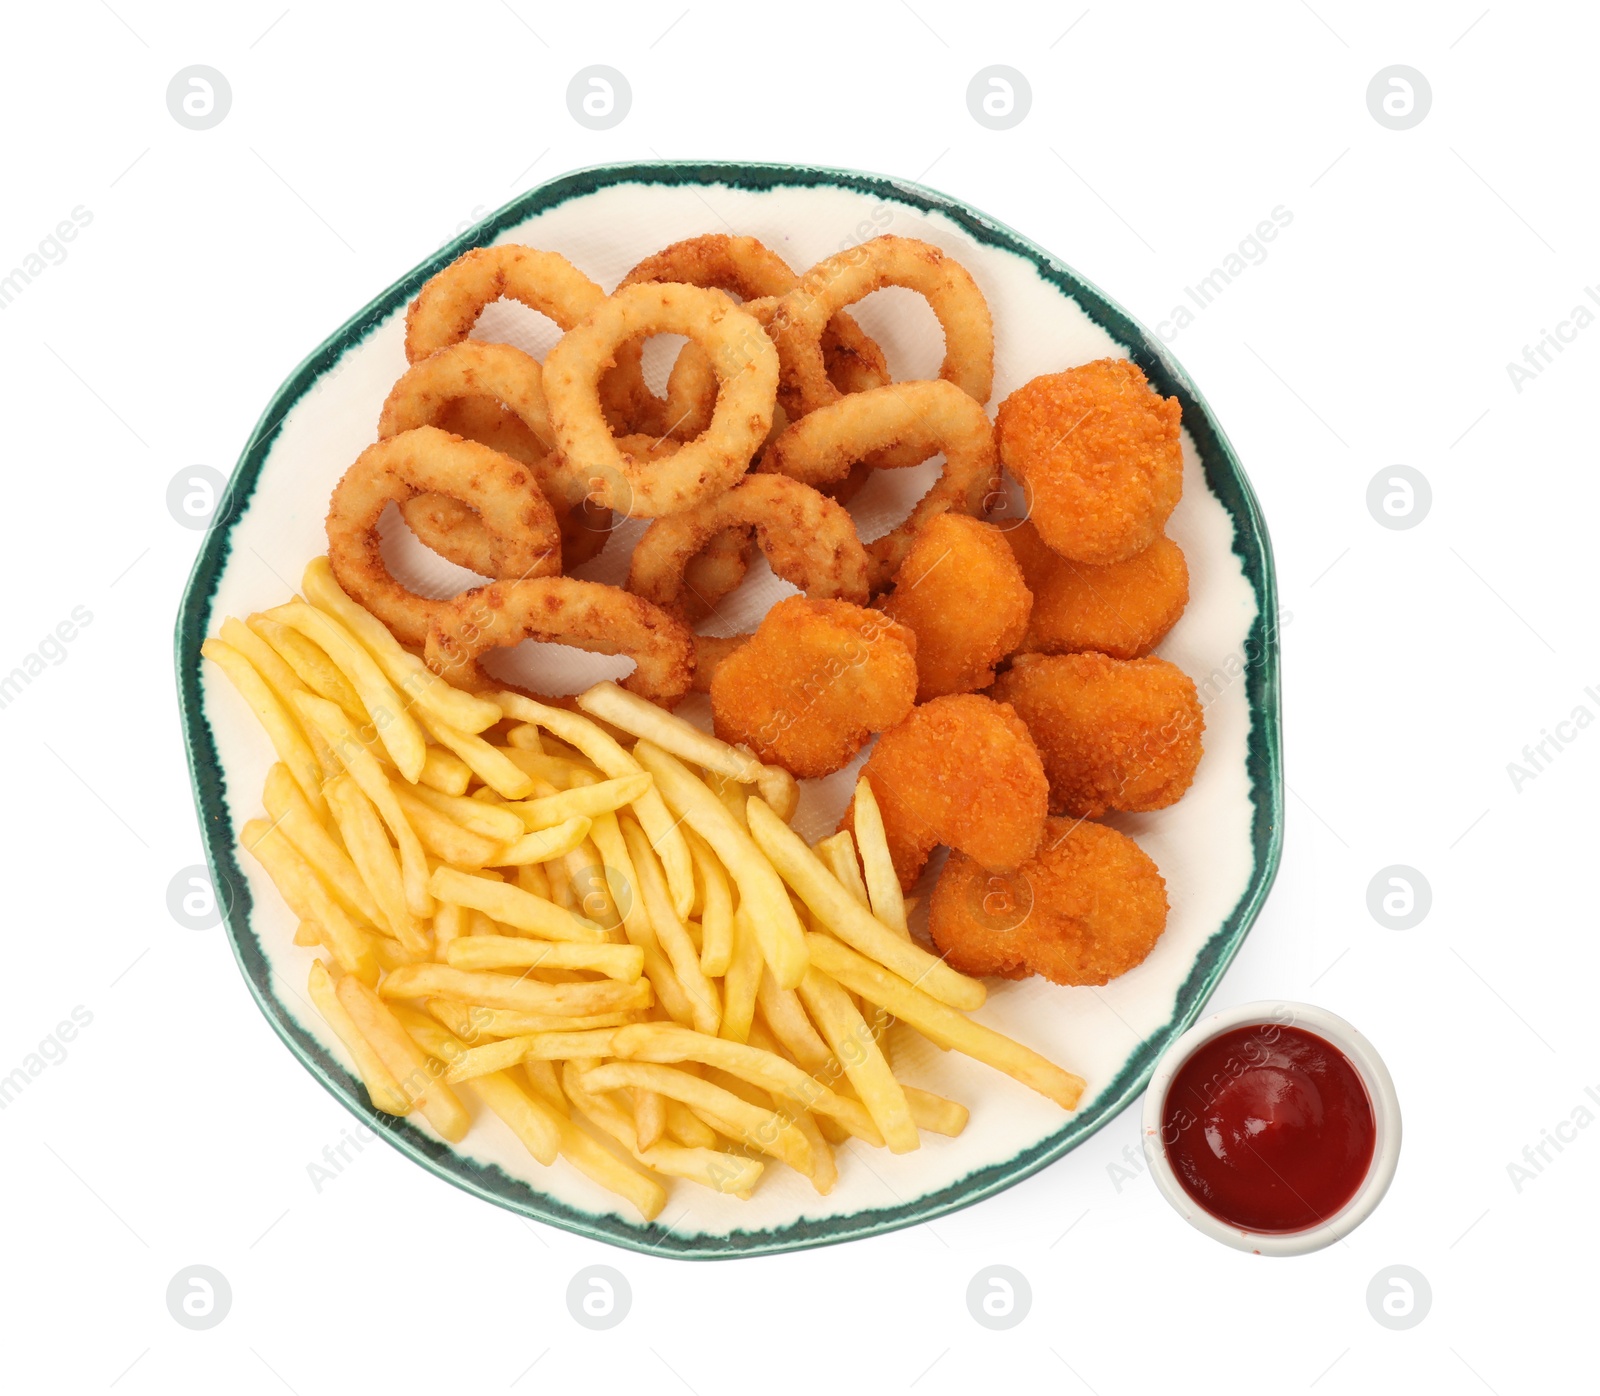 Photo of Tasty chicken nuggets, french fries, fried onion rings and ketchup on white background, top view